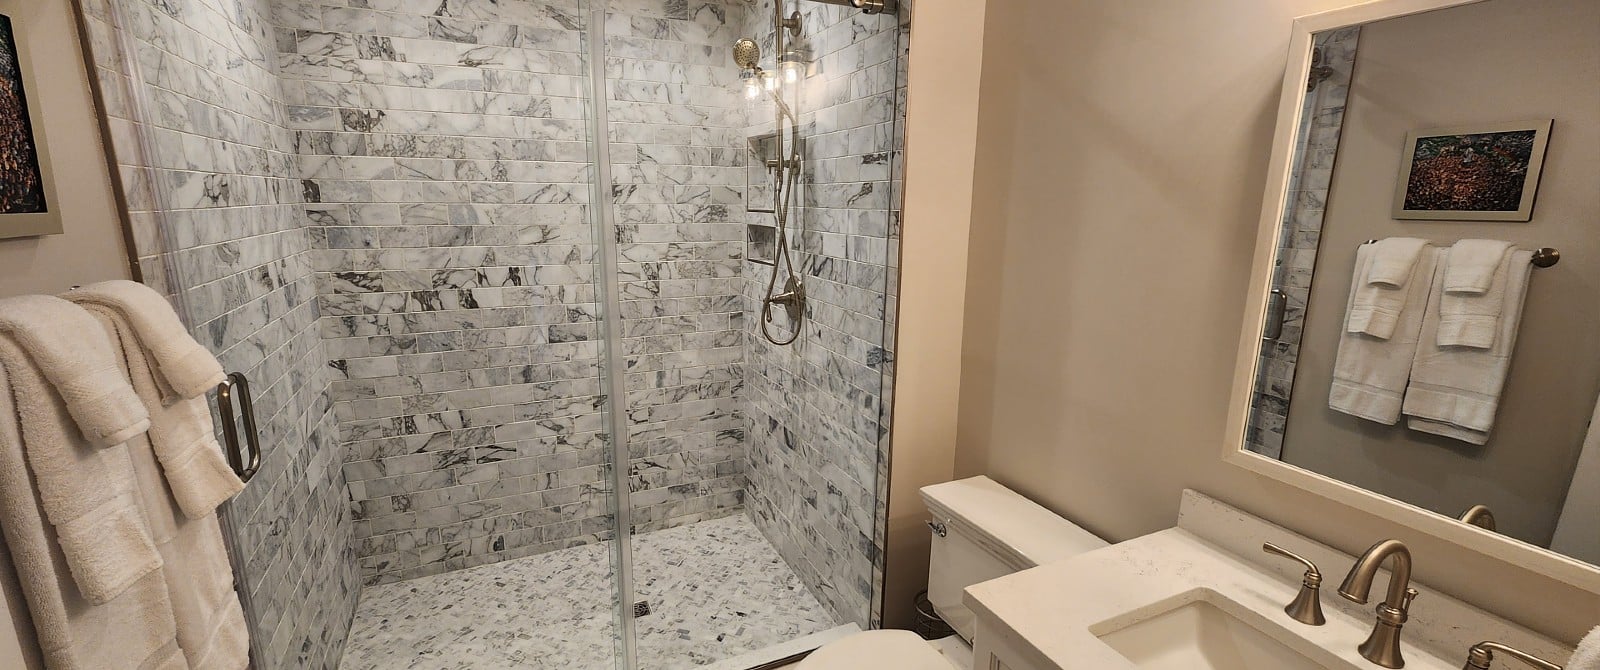 Bathroom with tiled stand up shower with glass doors, toilet, vanity, large mirror and towels hung on the wall